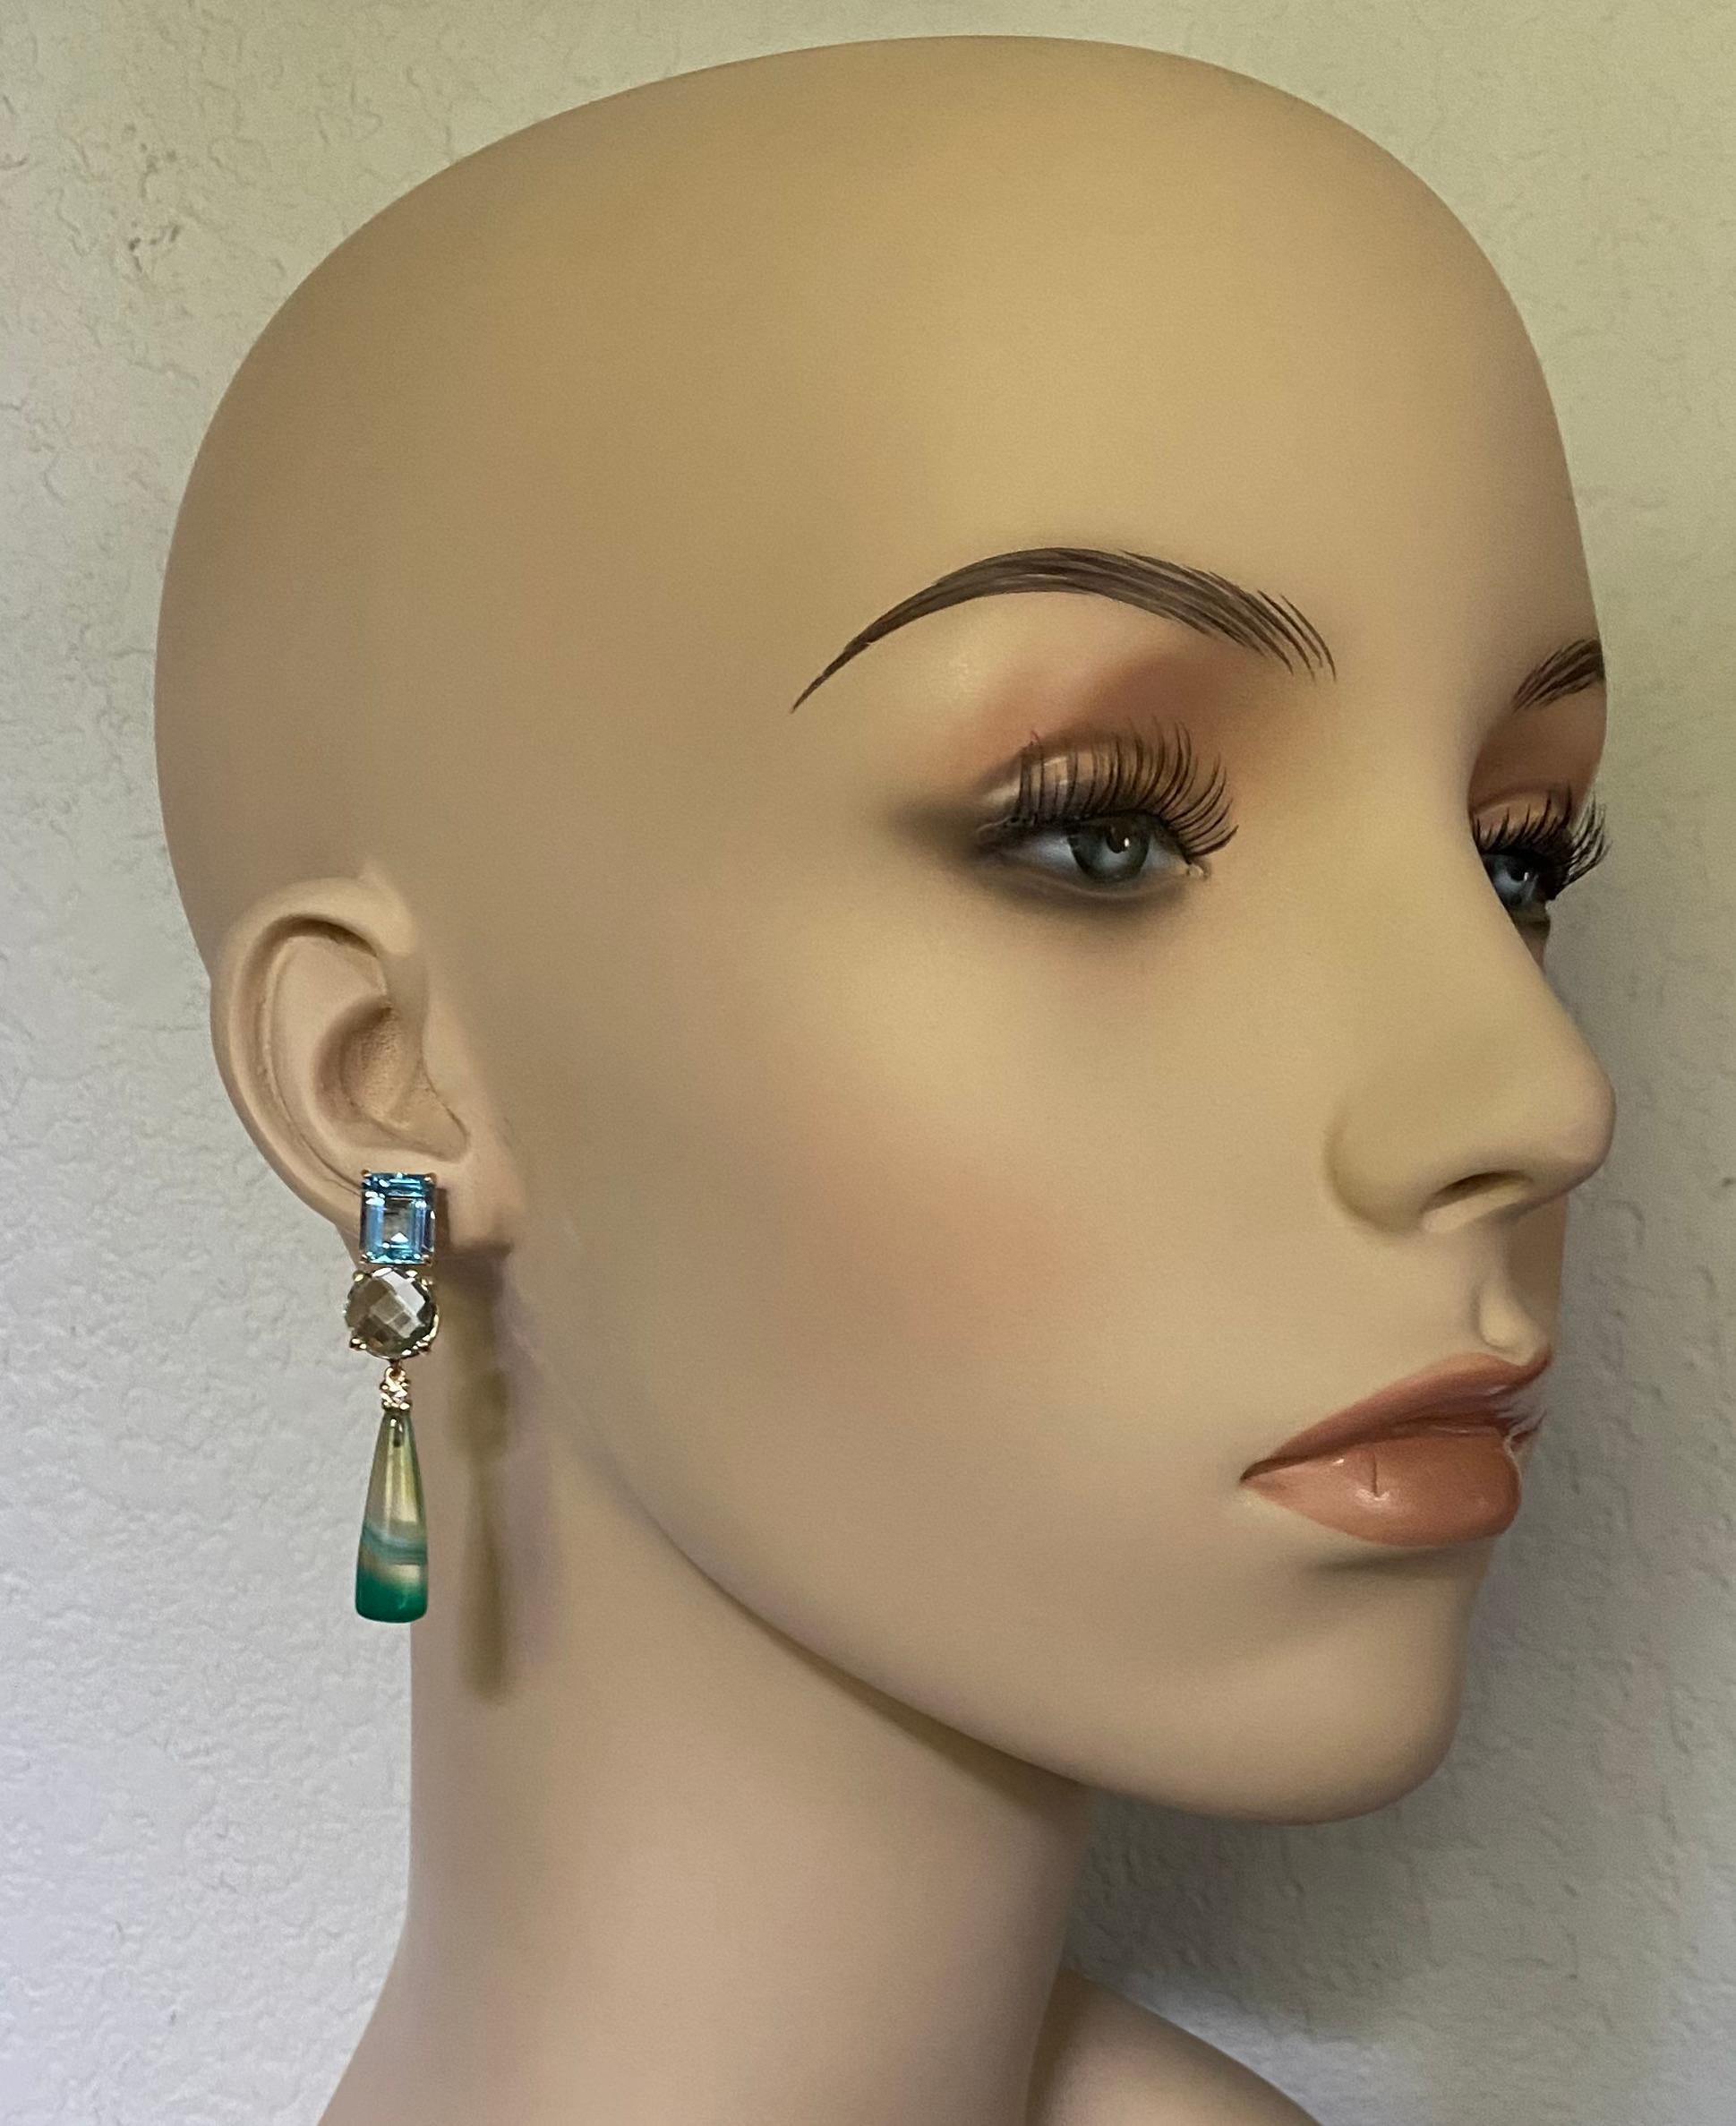 Blue topaz, green quartz, diamond and banded chalcedony agate  comprise these discerning dangle earrings.  The emerald cut blue topaz (origin: Brazil) is a delicate sky blue color.  The gems are well cut, polished and matched.  The round green